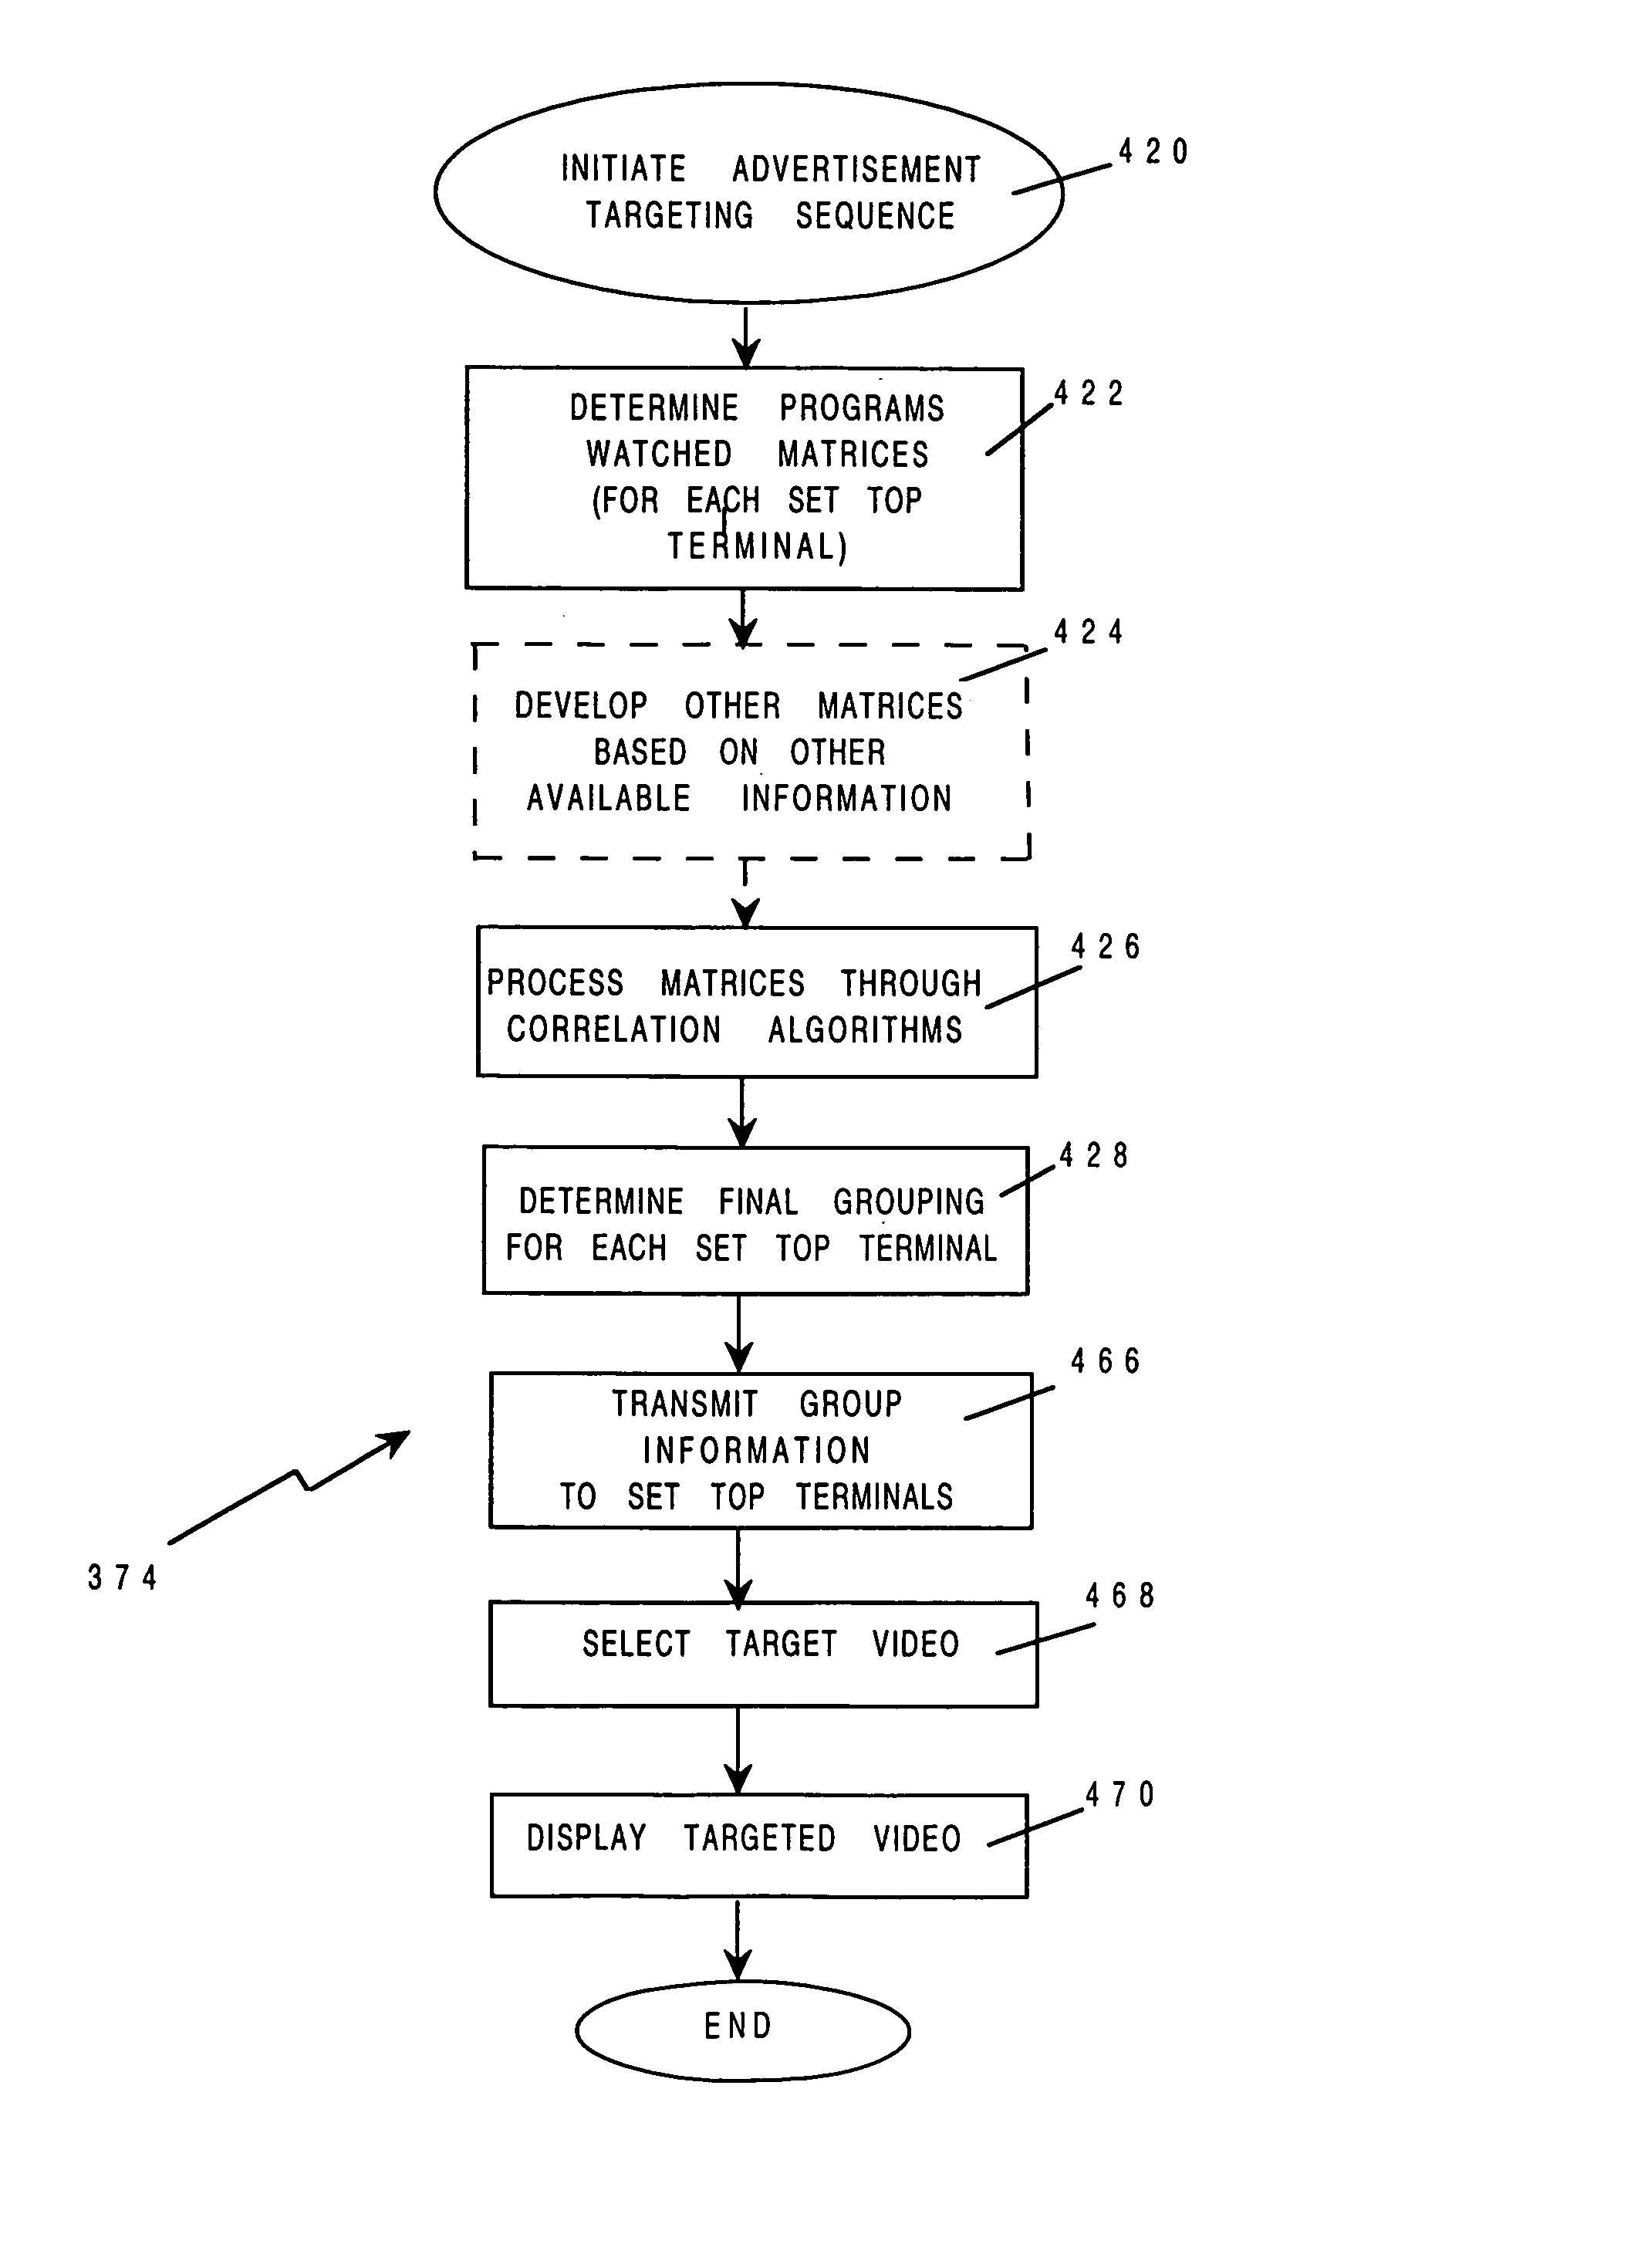 Method and apparatus for gathering programs watched data